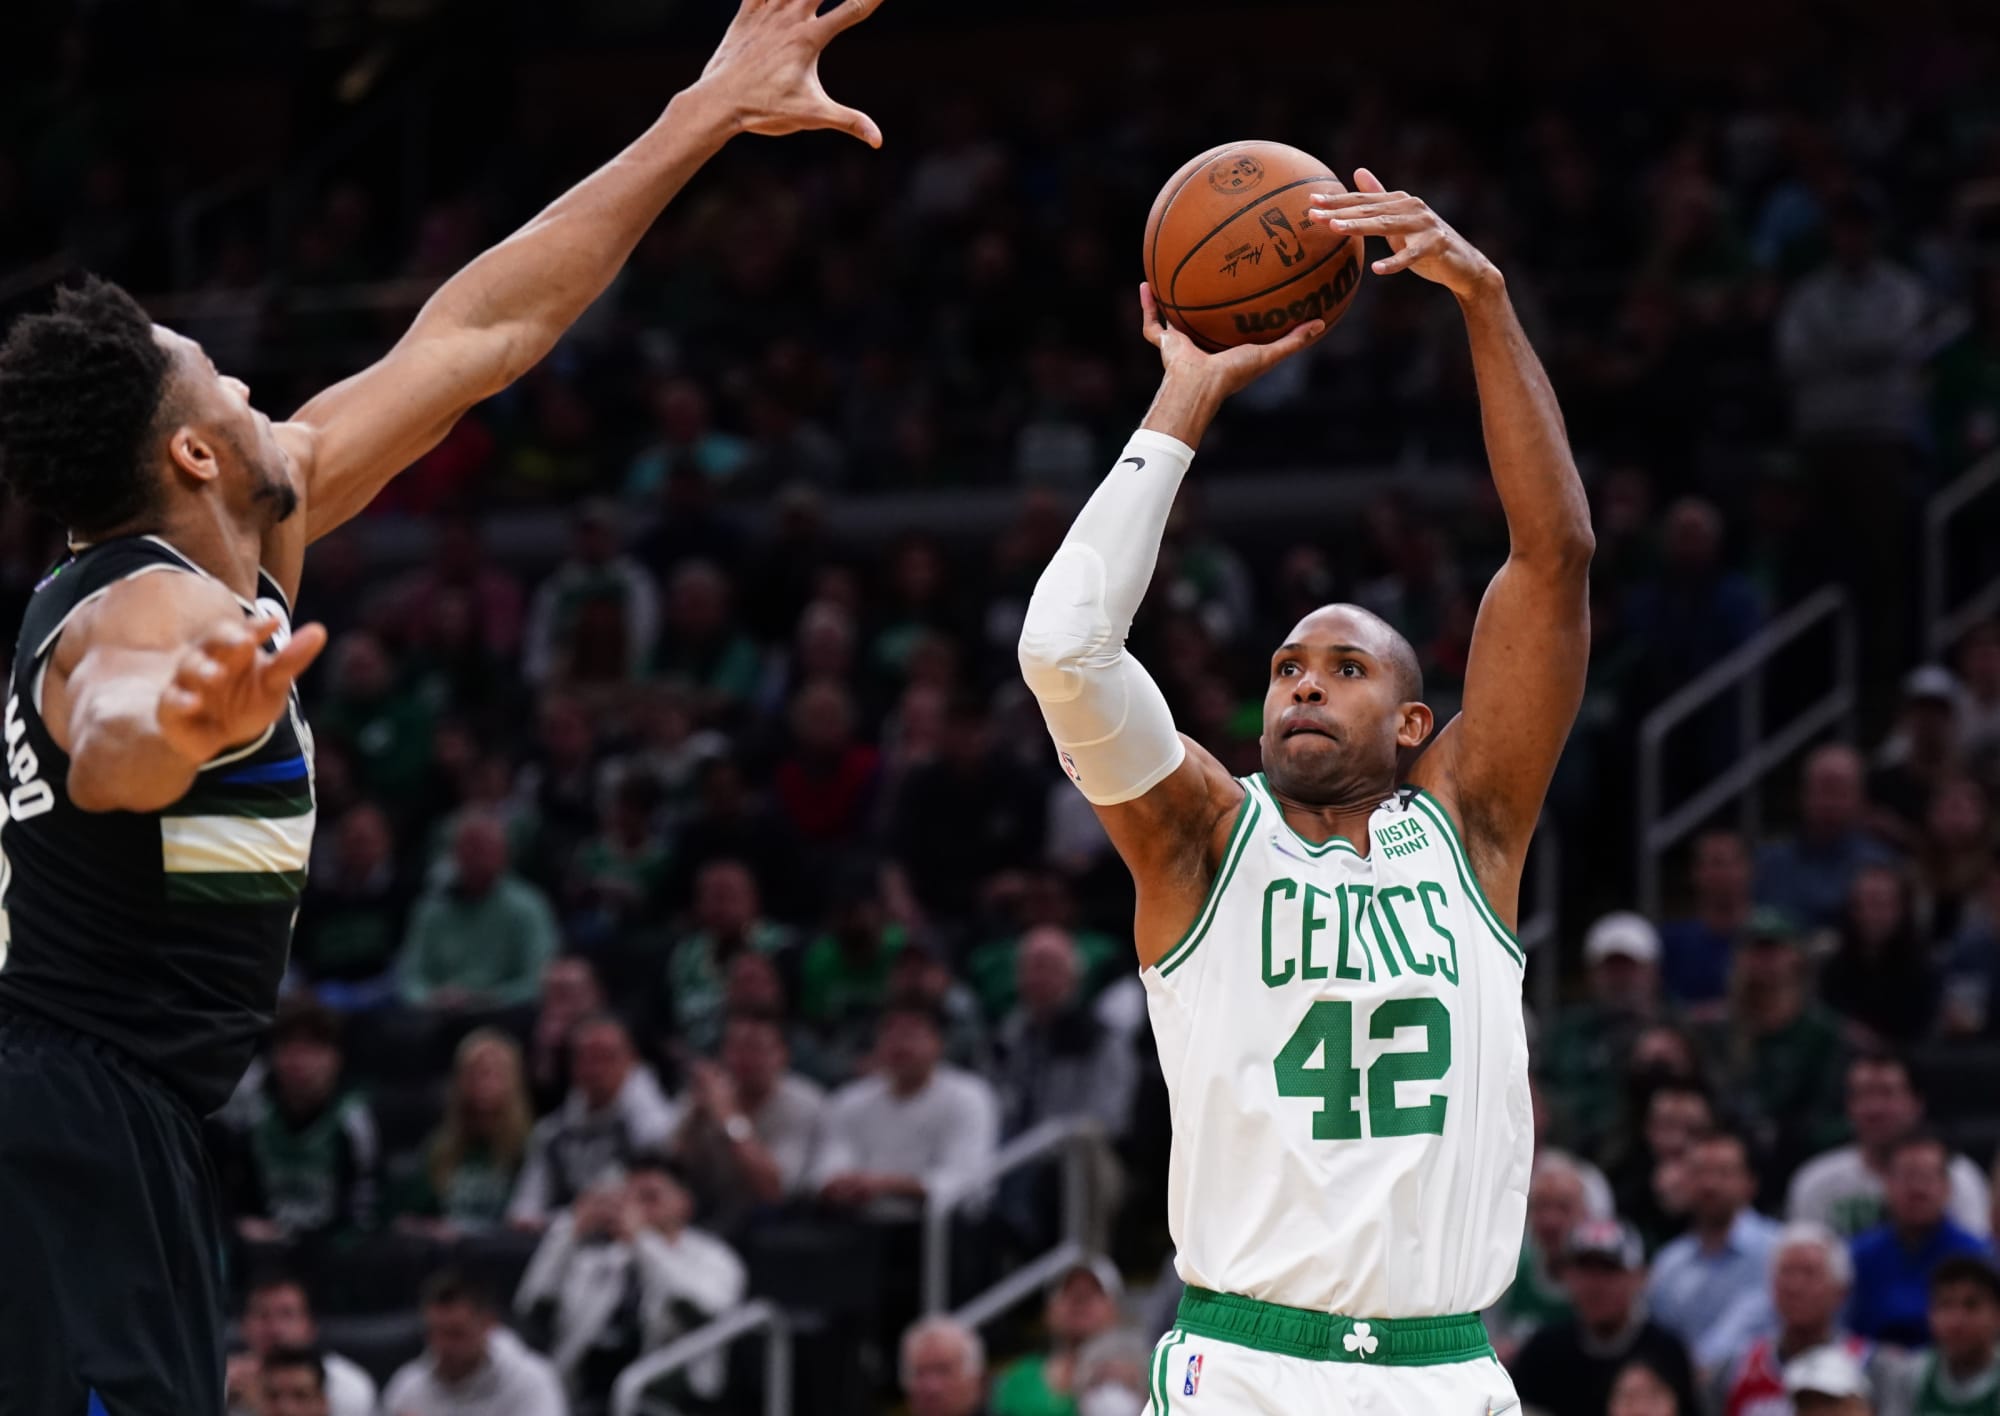 The Lengthy Two: Al Horford’s ageless brilliance and defining MVP